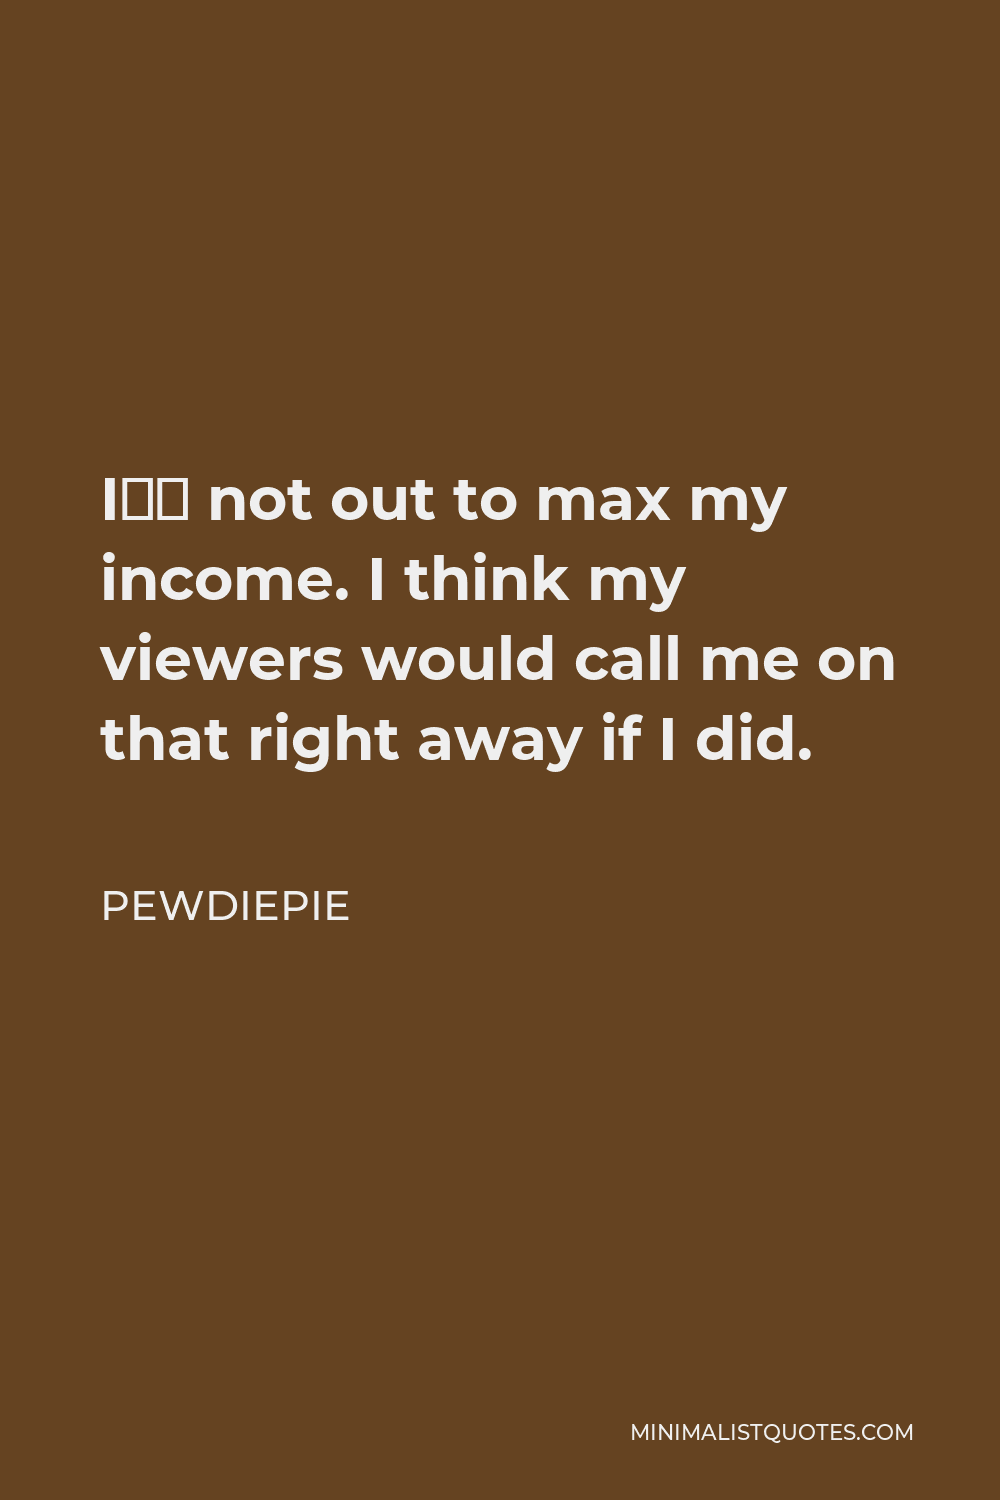 PewDiePie Quote - I’m not out to max my income. I think my viewers would call me on that right away if I did.